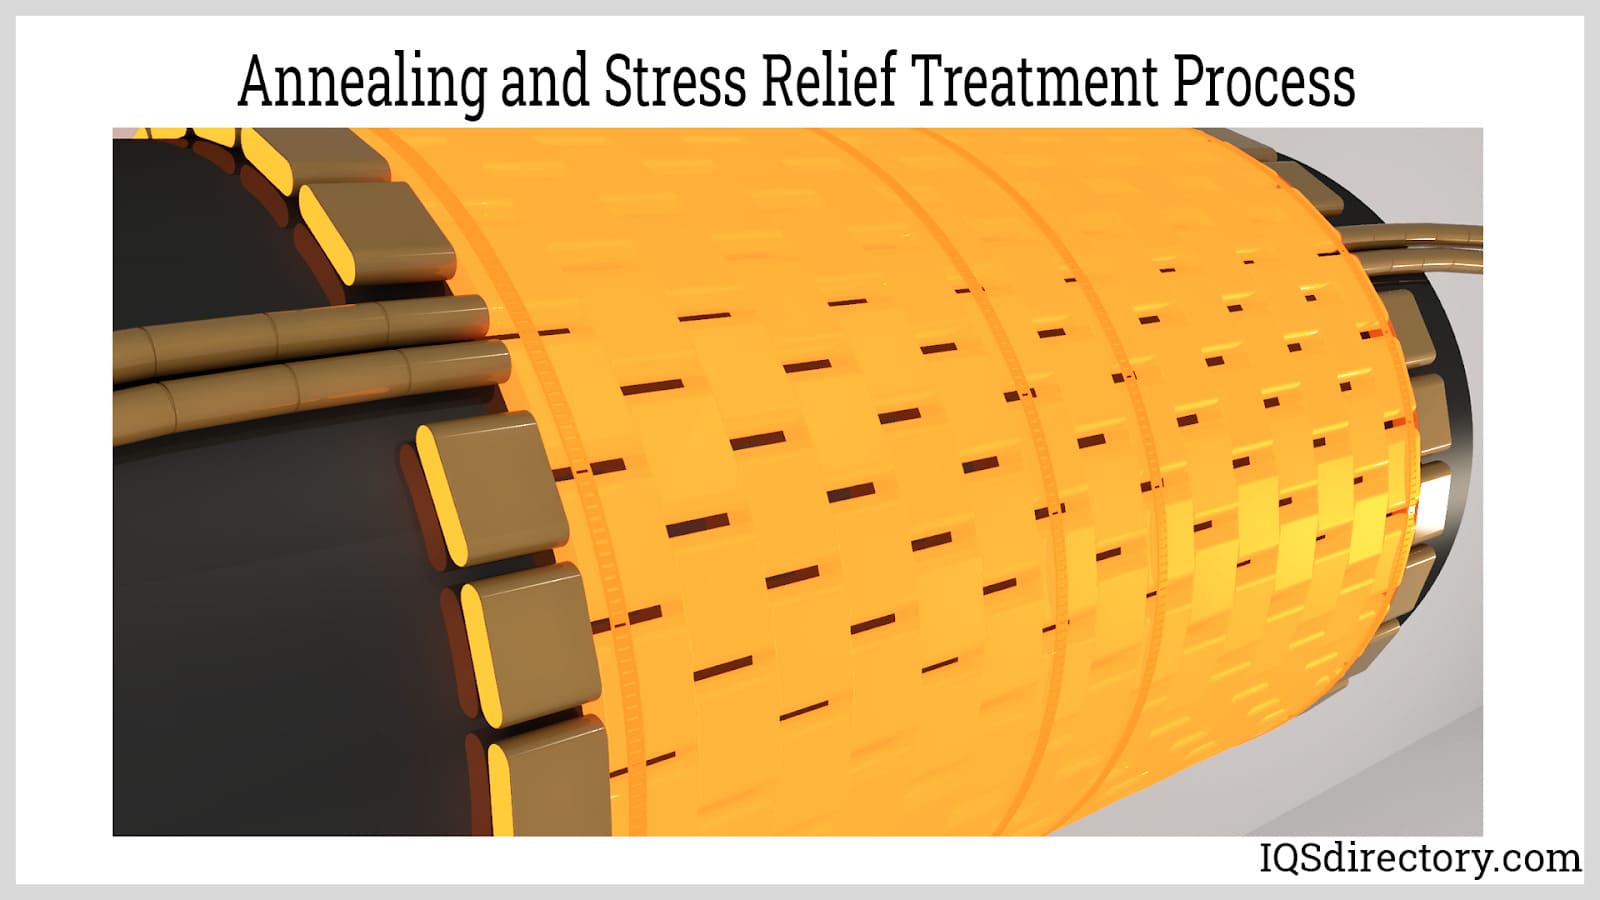 Annealing and Stress Relief Treatment Process